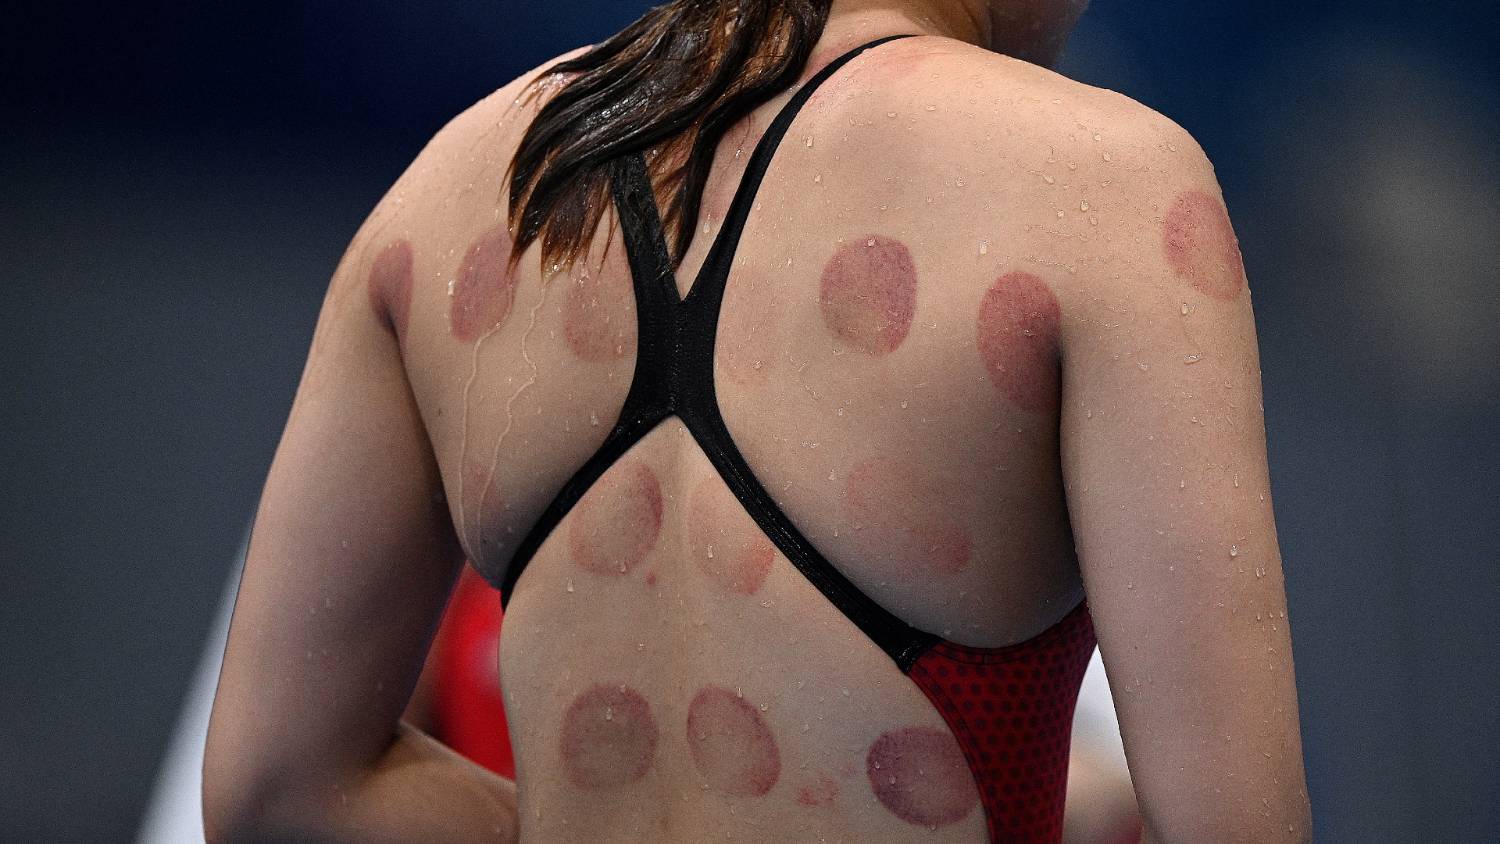 Cupping has become a form of competitive healing as athletes use the treatment to heal faster and quicker (AFP/Oli Scarff)